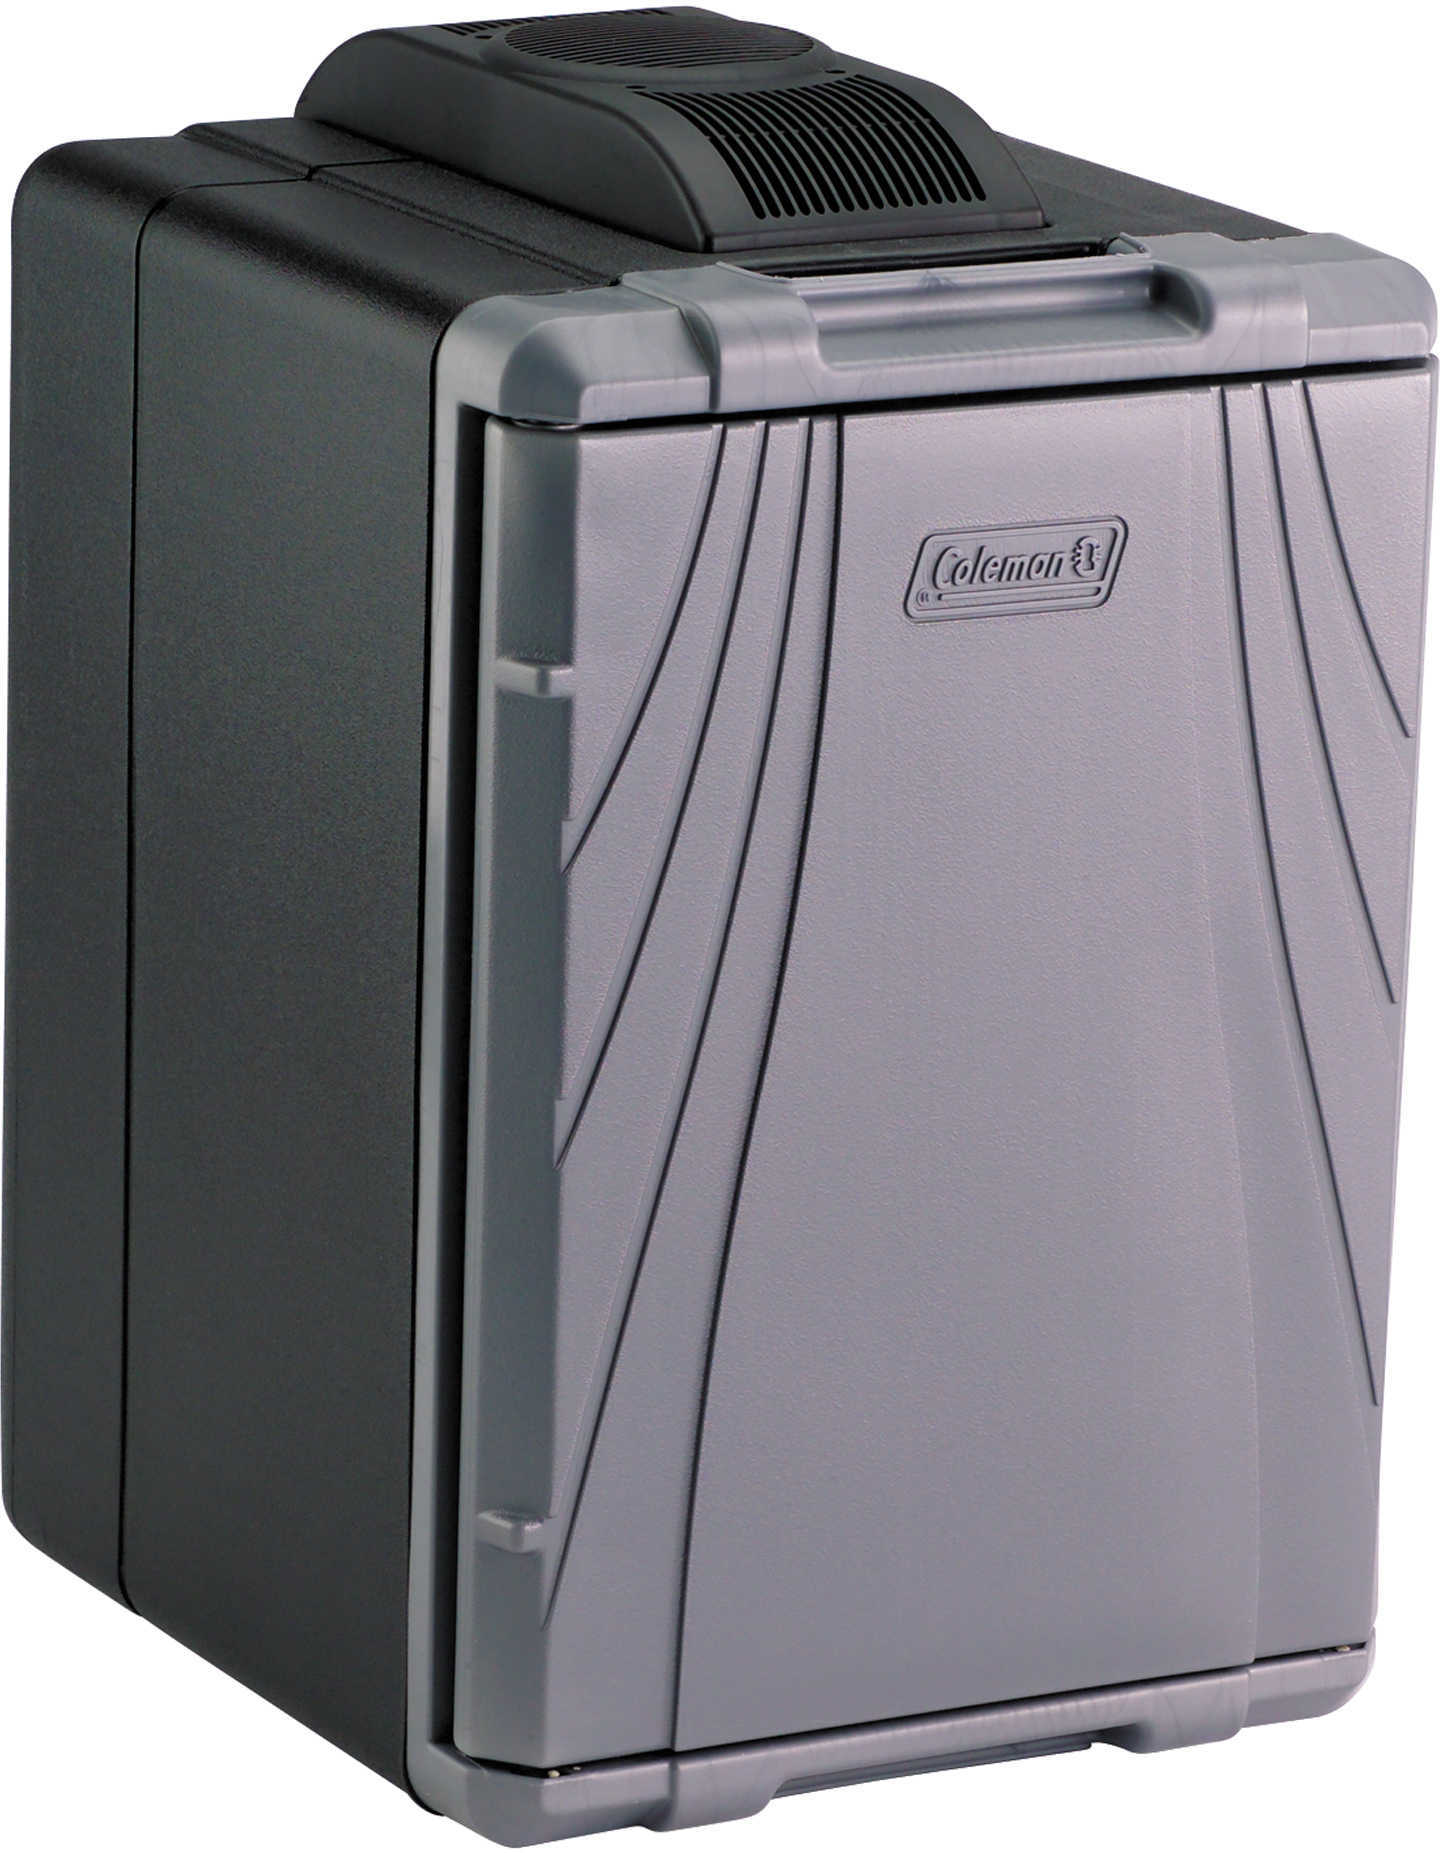 Coleman 40 Quart Powerchill Hot/Cold Thermoelectric Cooler